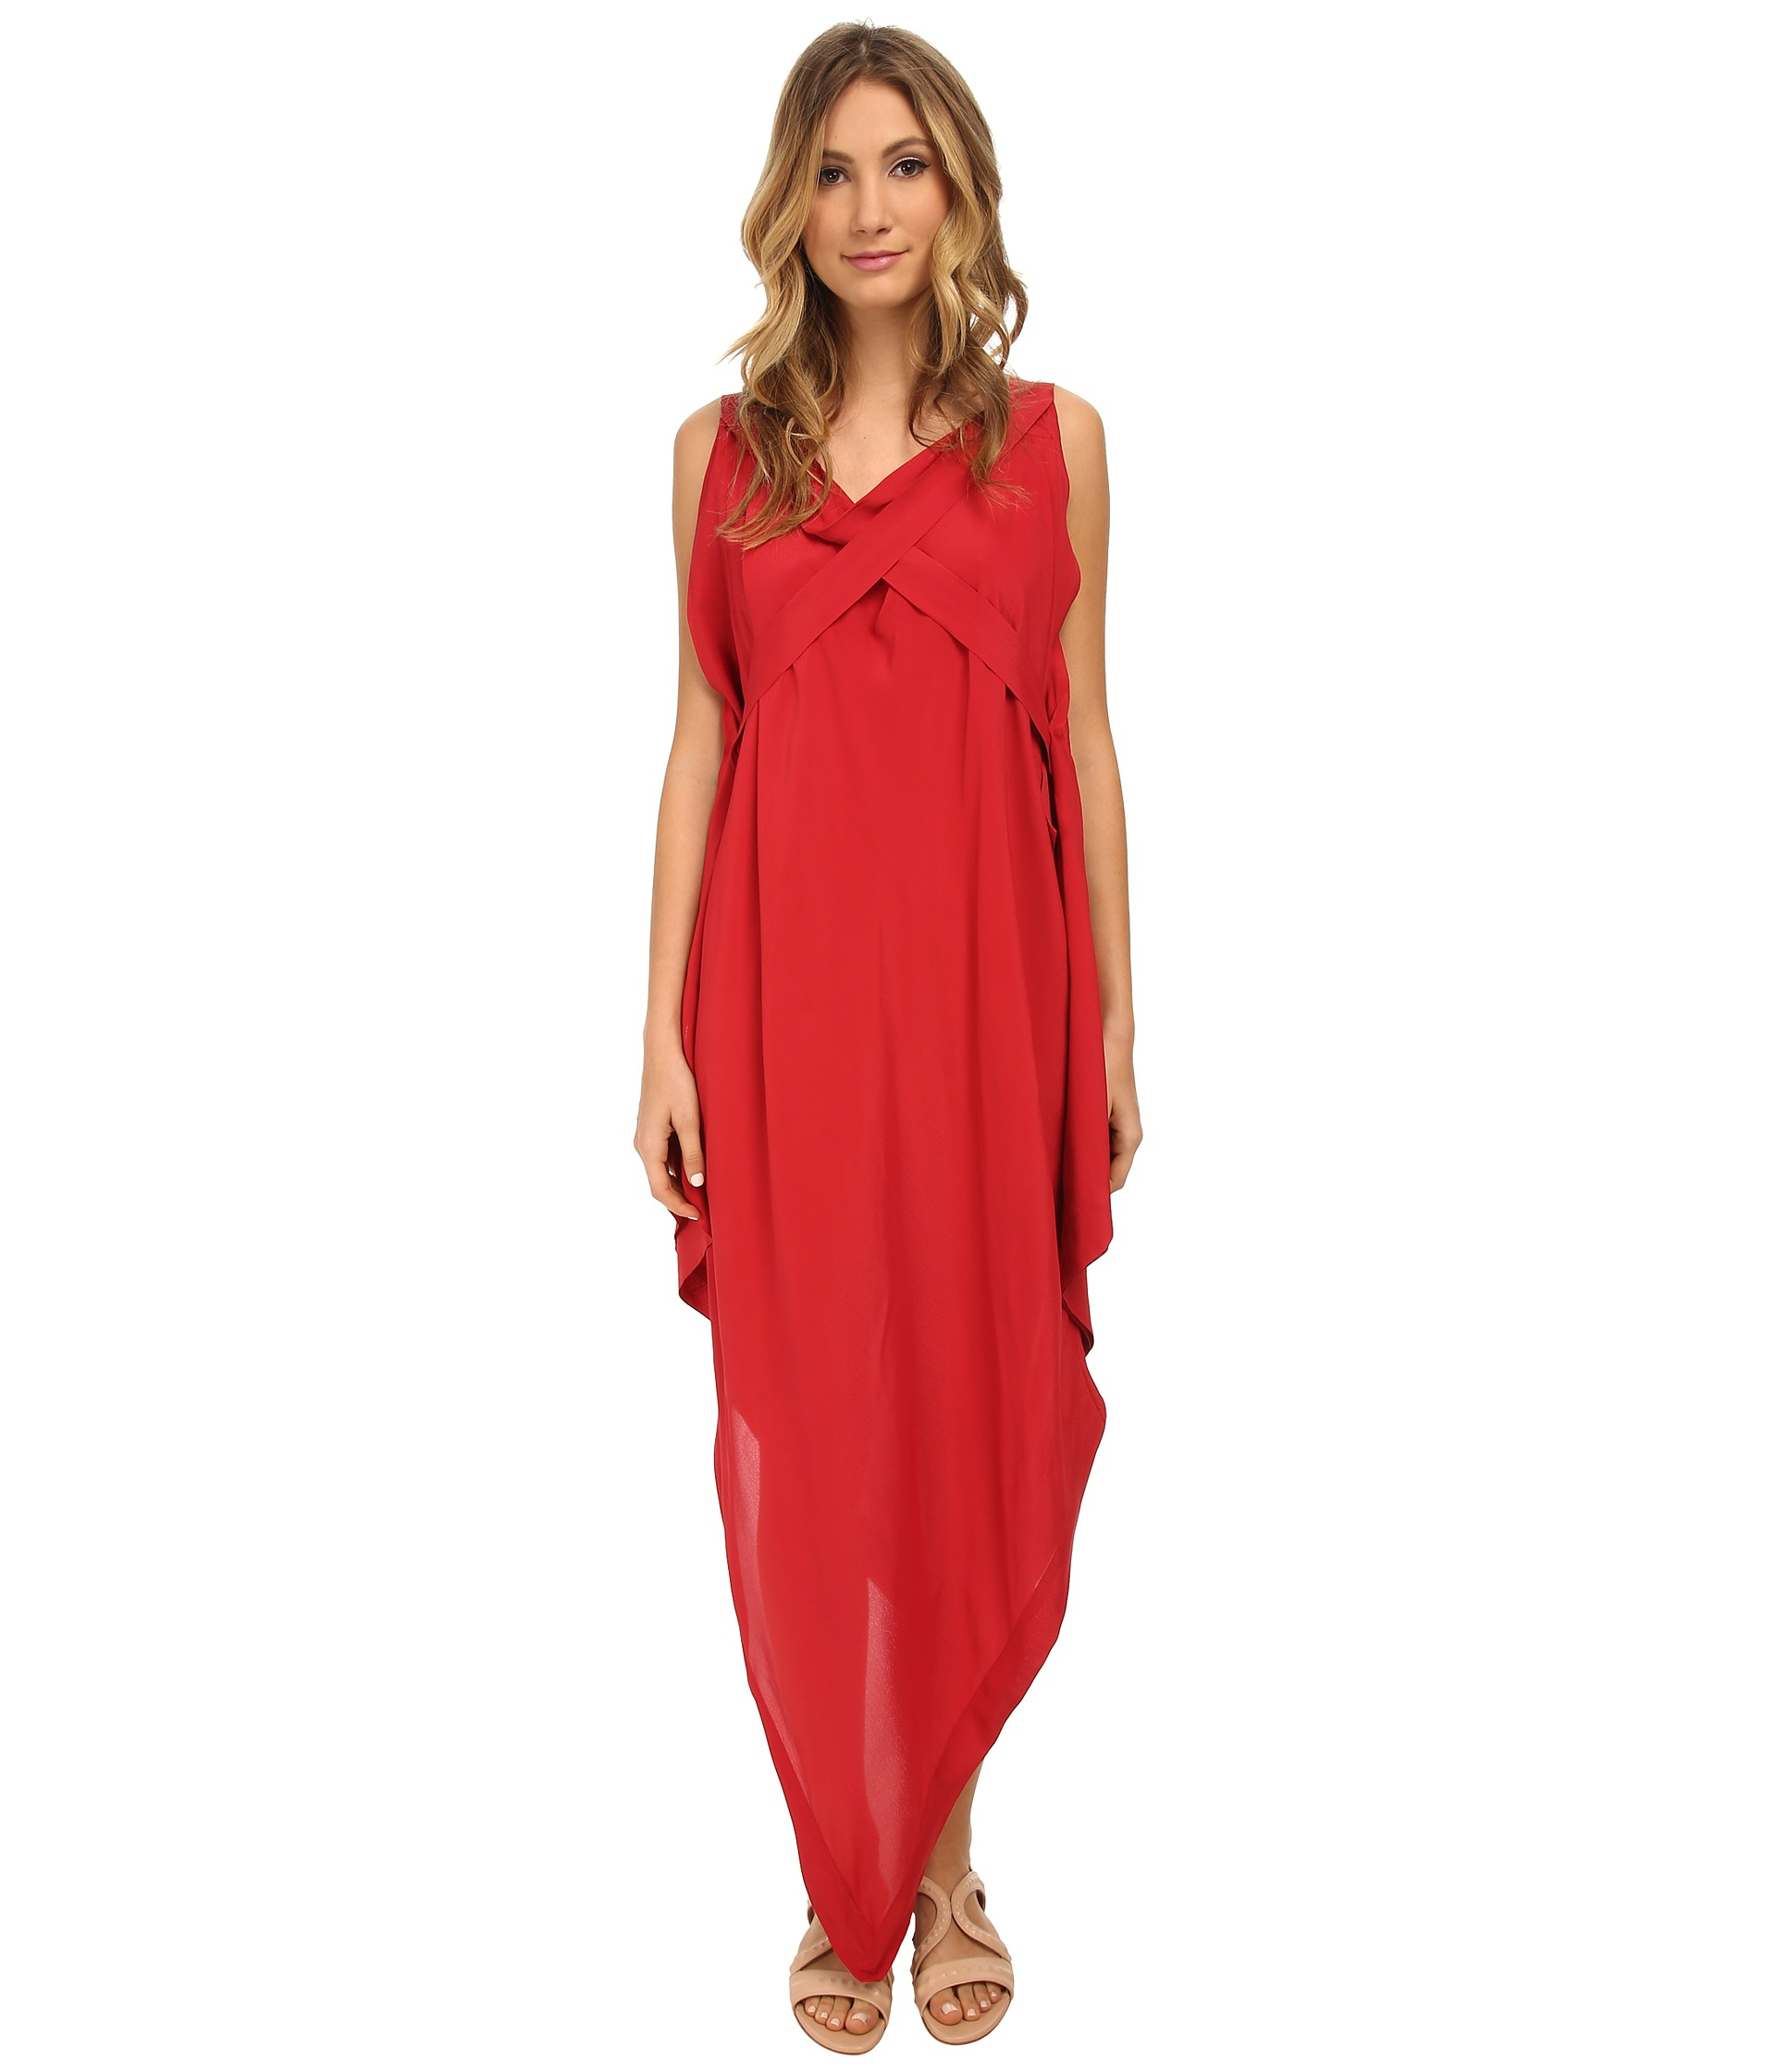 Lyst - Vivienne Westwood Anglomania Revival Dress in Red